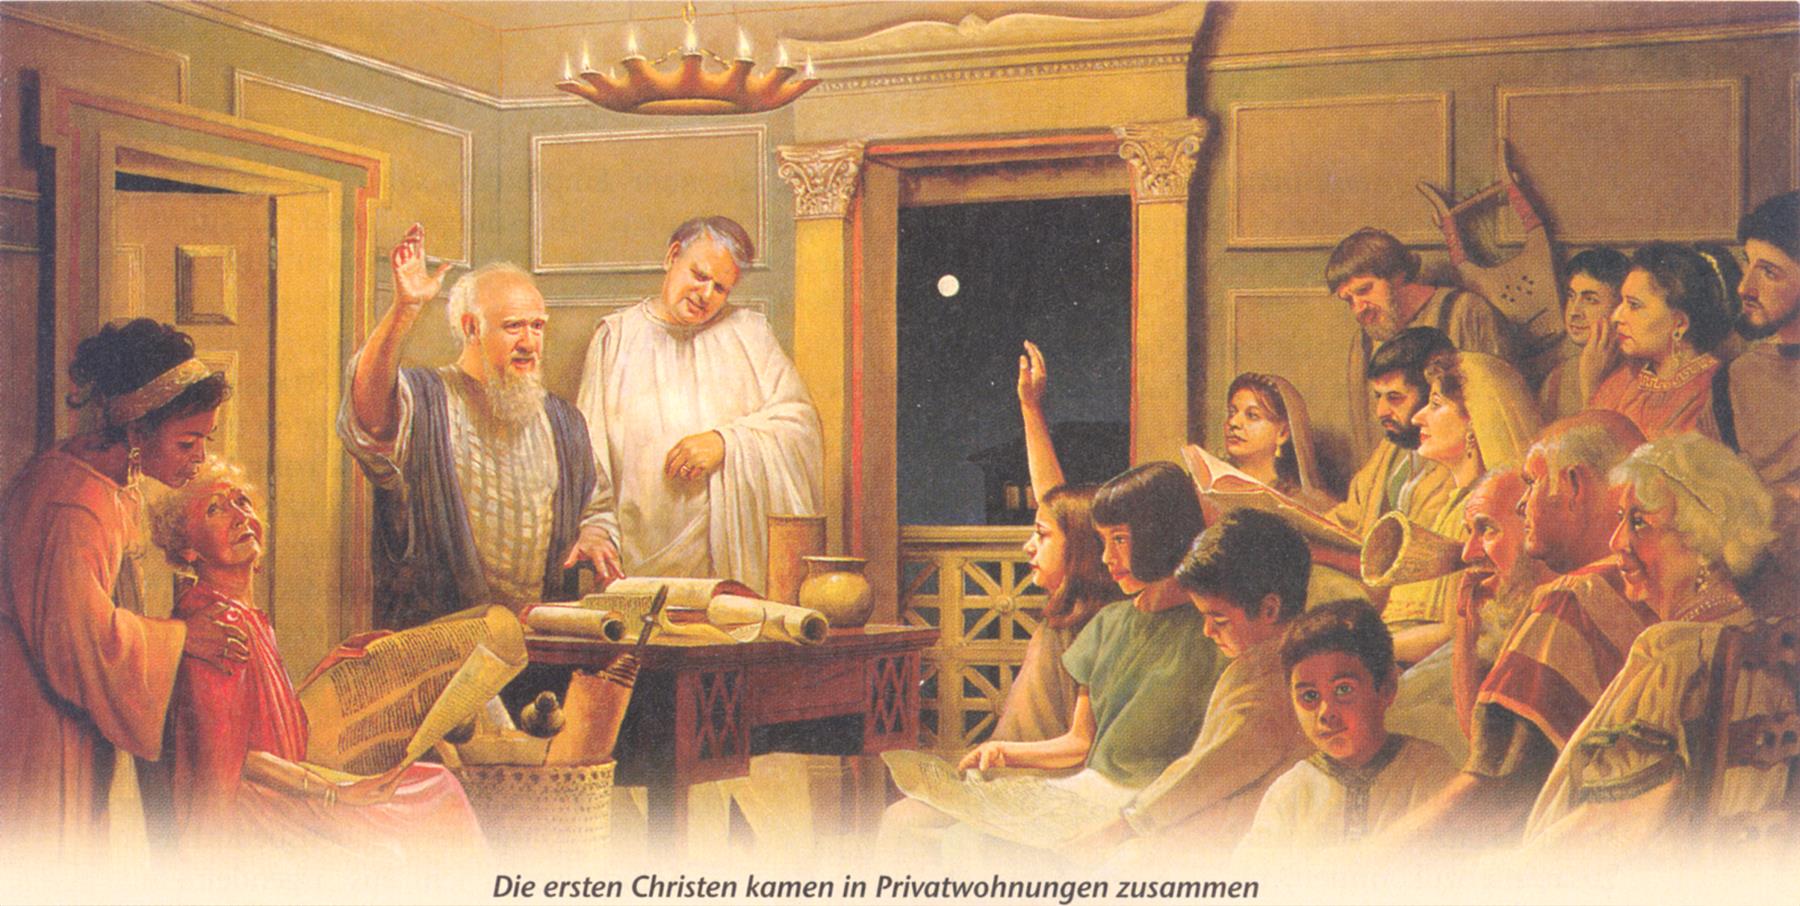 The first Christians came together in private homes